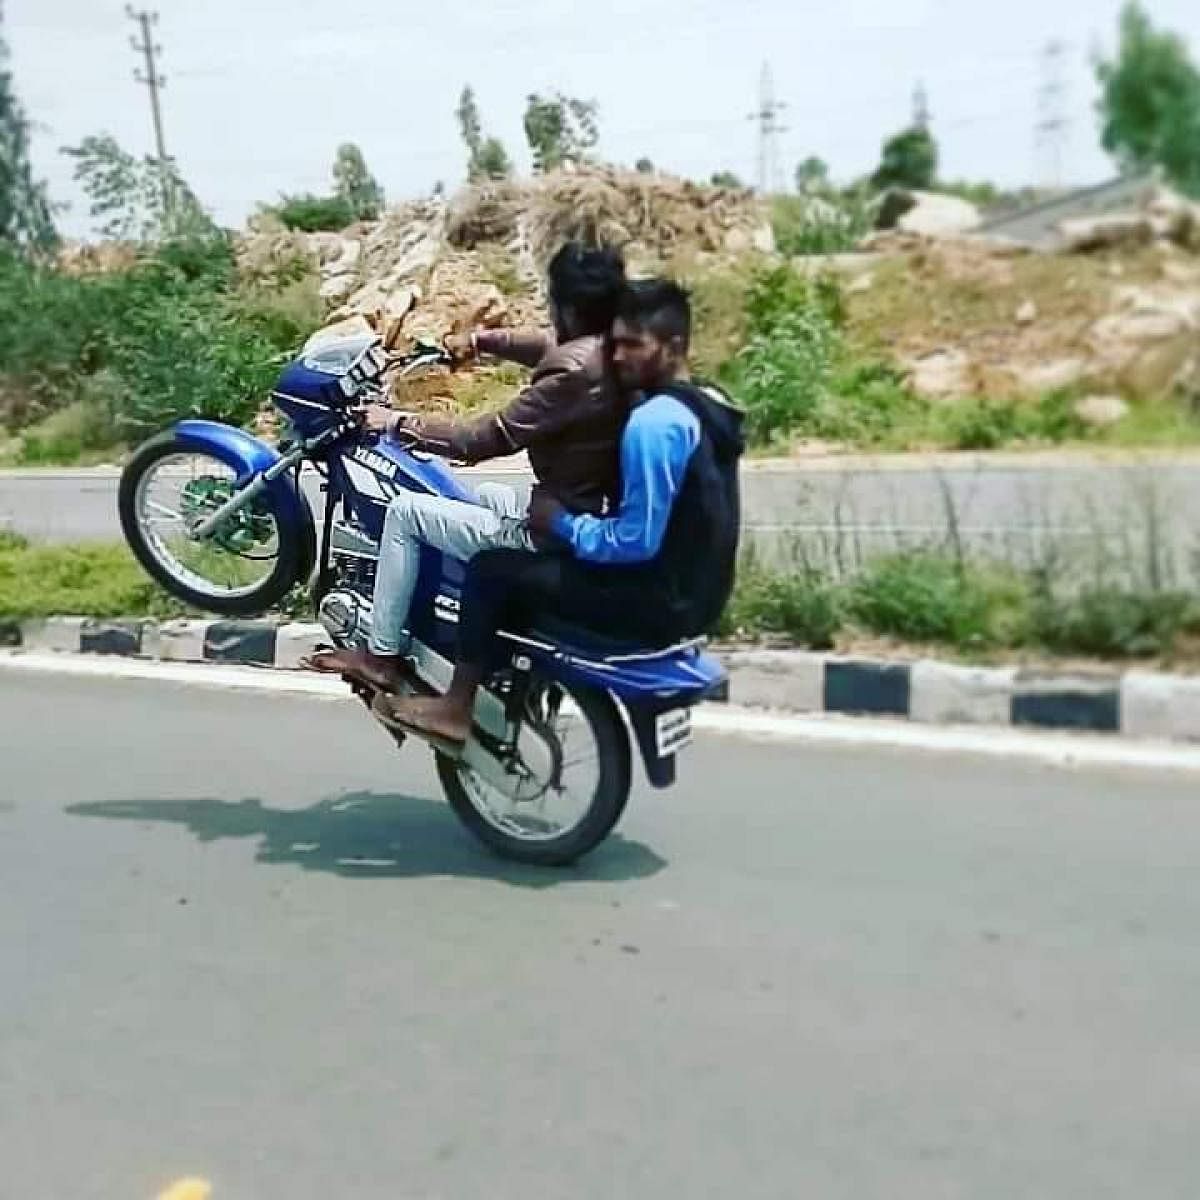 A rider doing a wheelie, as captured by his friend and posted on social media. POLICE HANDOUT